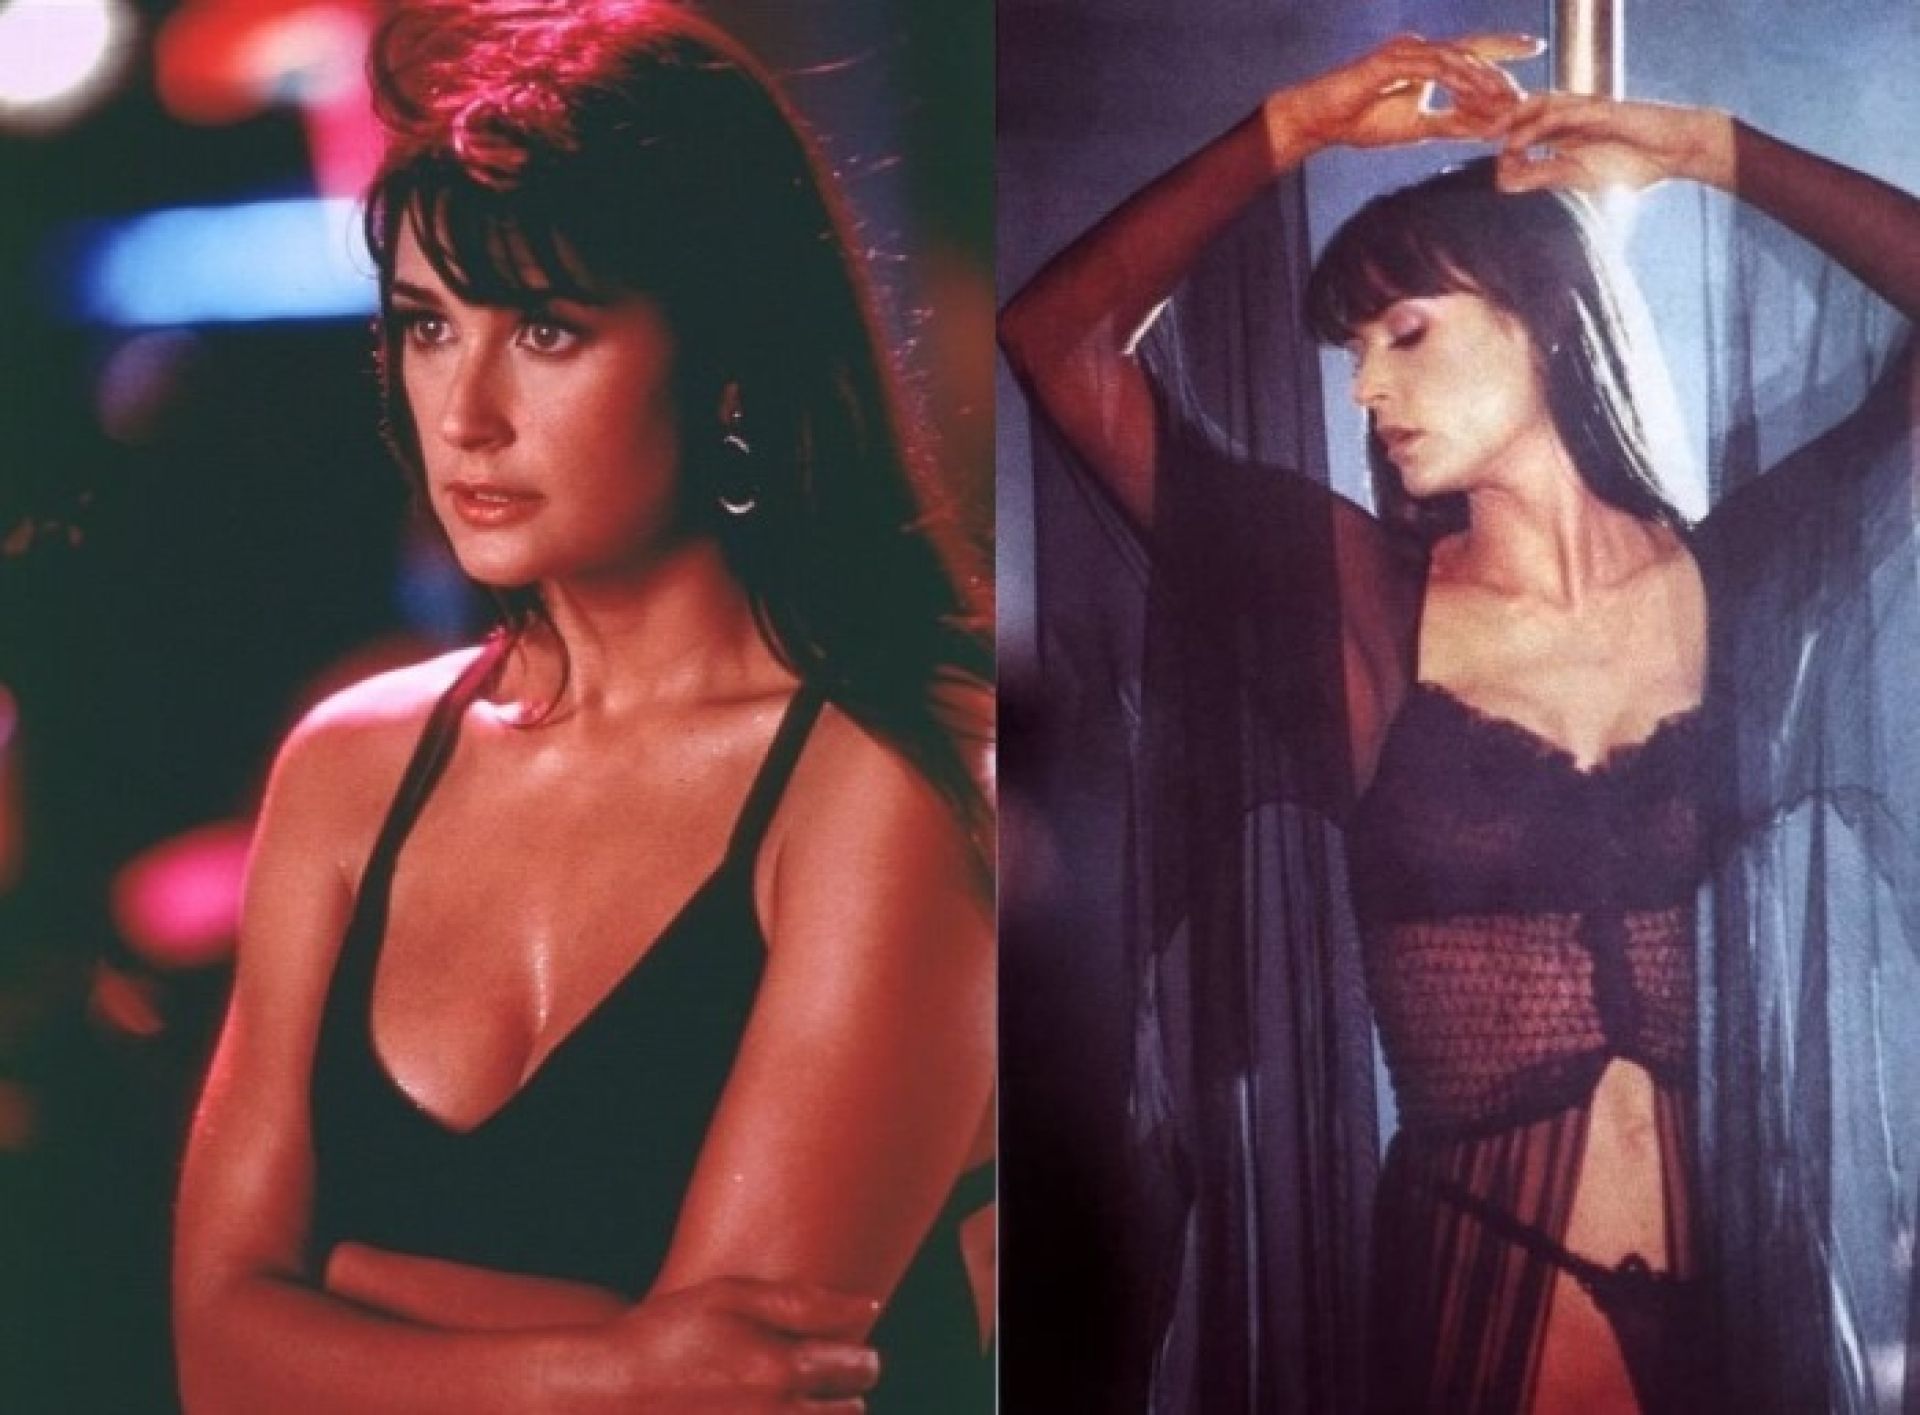 Demi moore striptease anniversary pictures